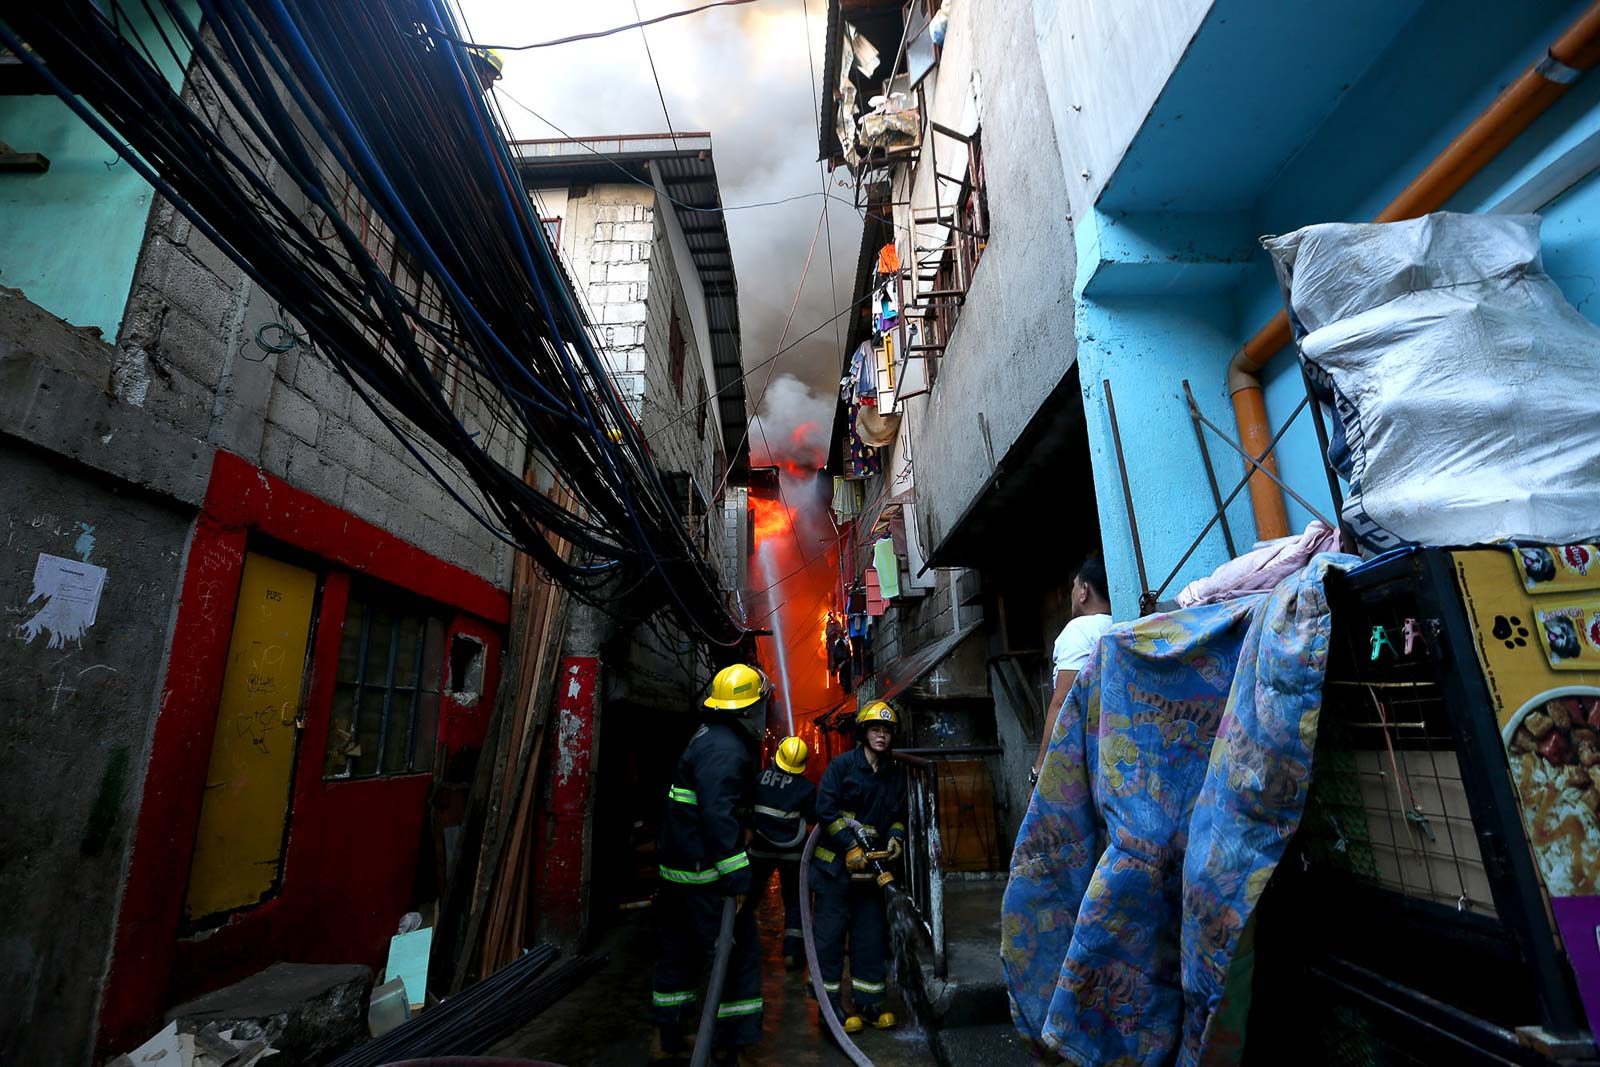 GENERAL ALARM. All available fire trucks in Metro Manila are deployed to respond to the Barangay Damayang Lagi fire. 